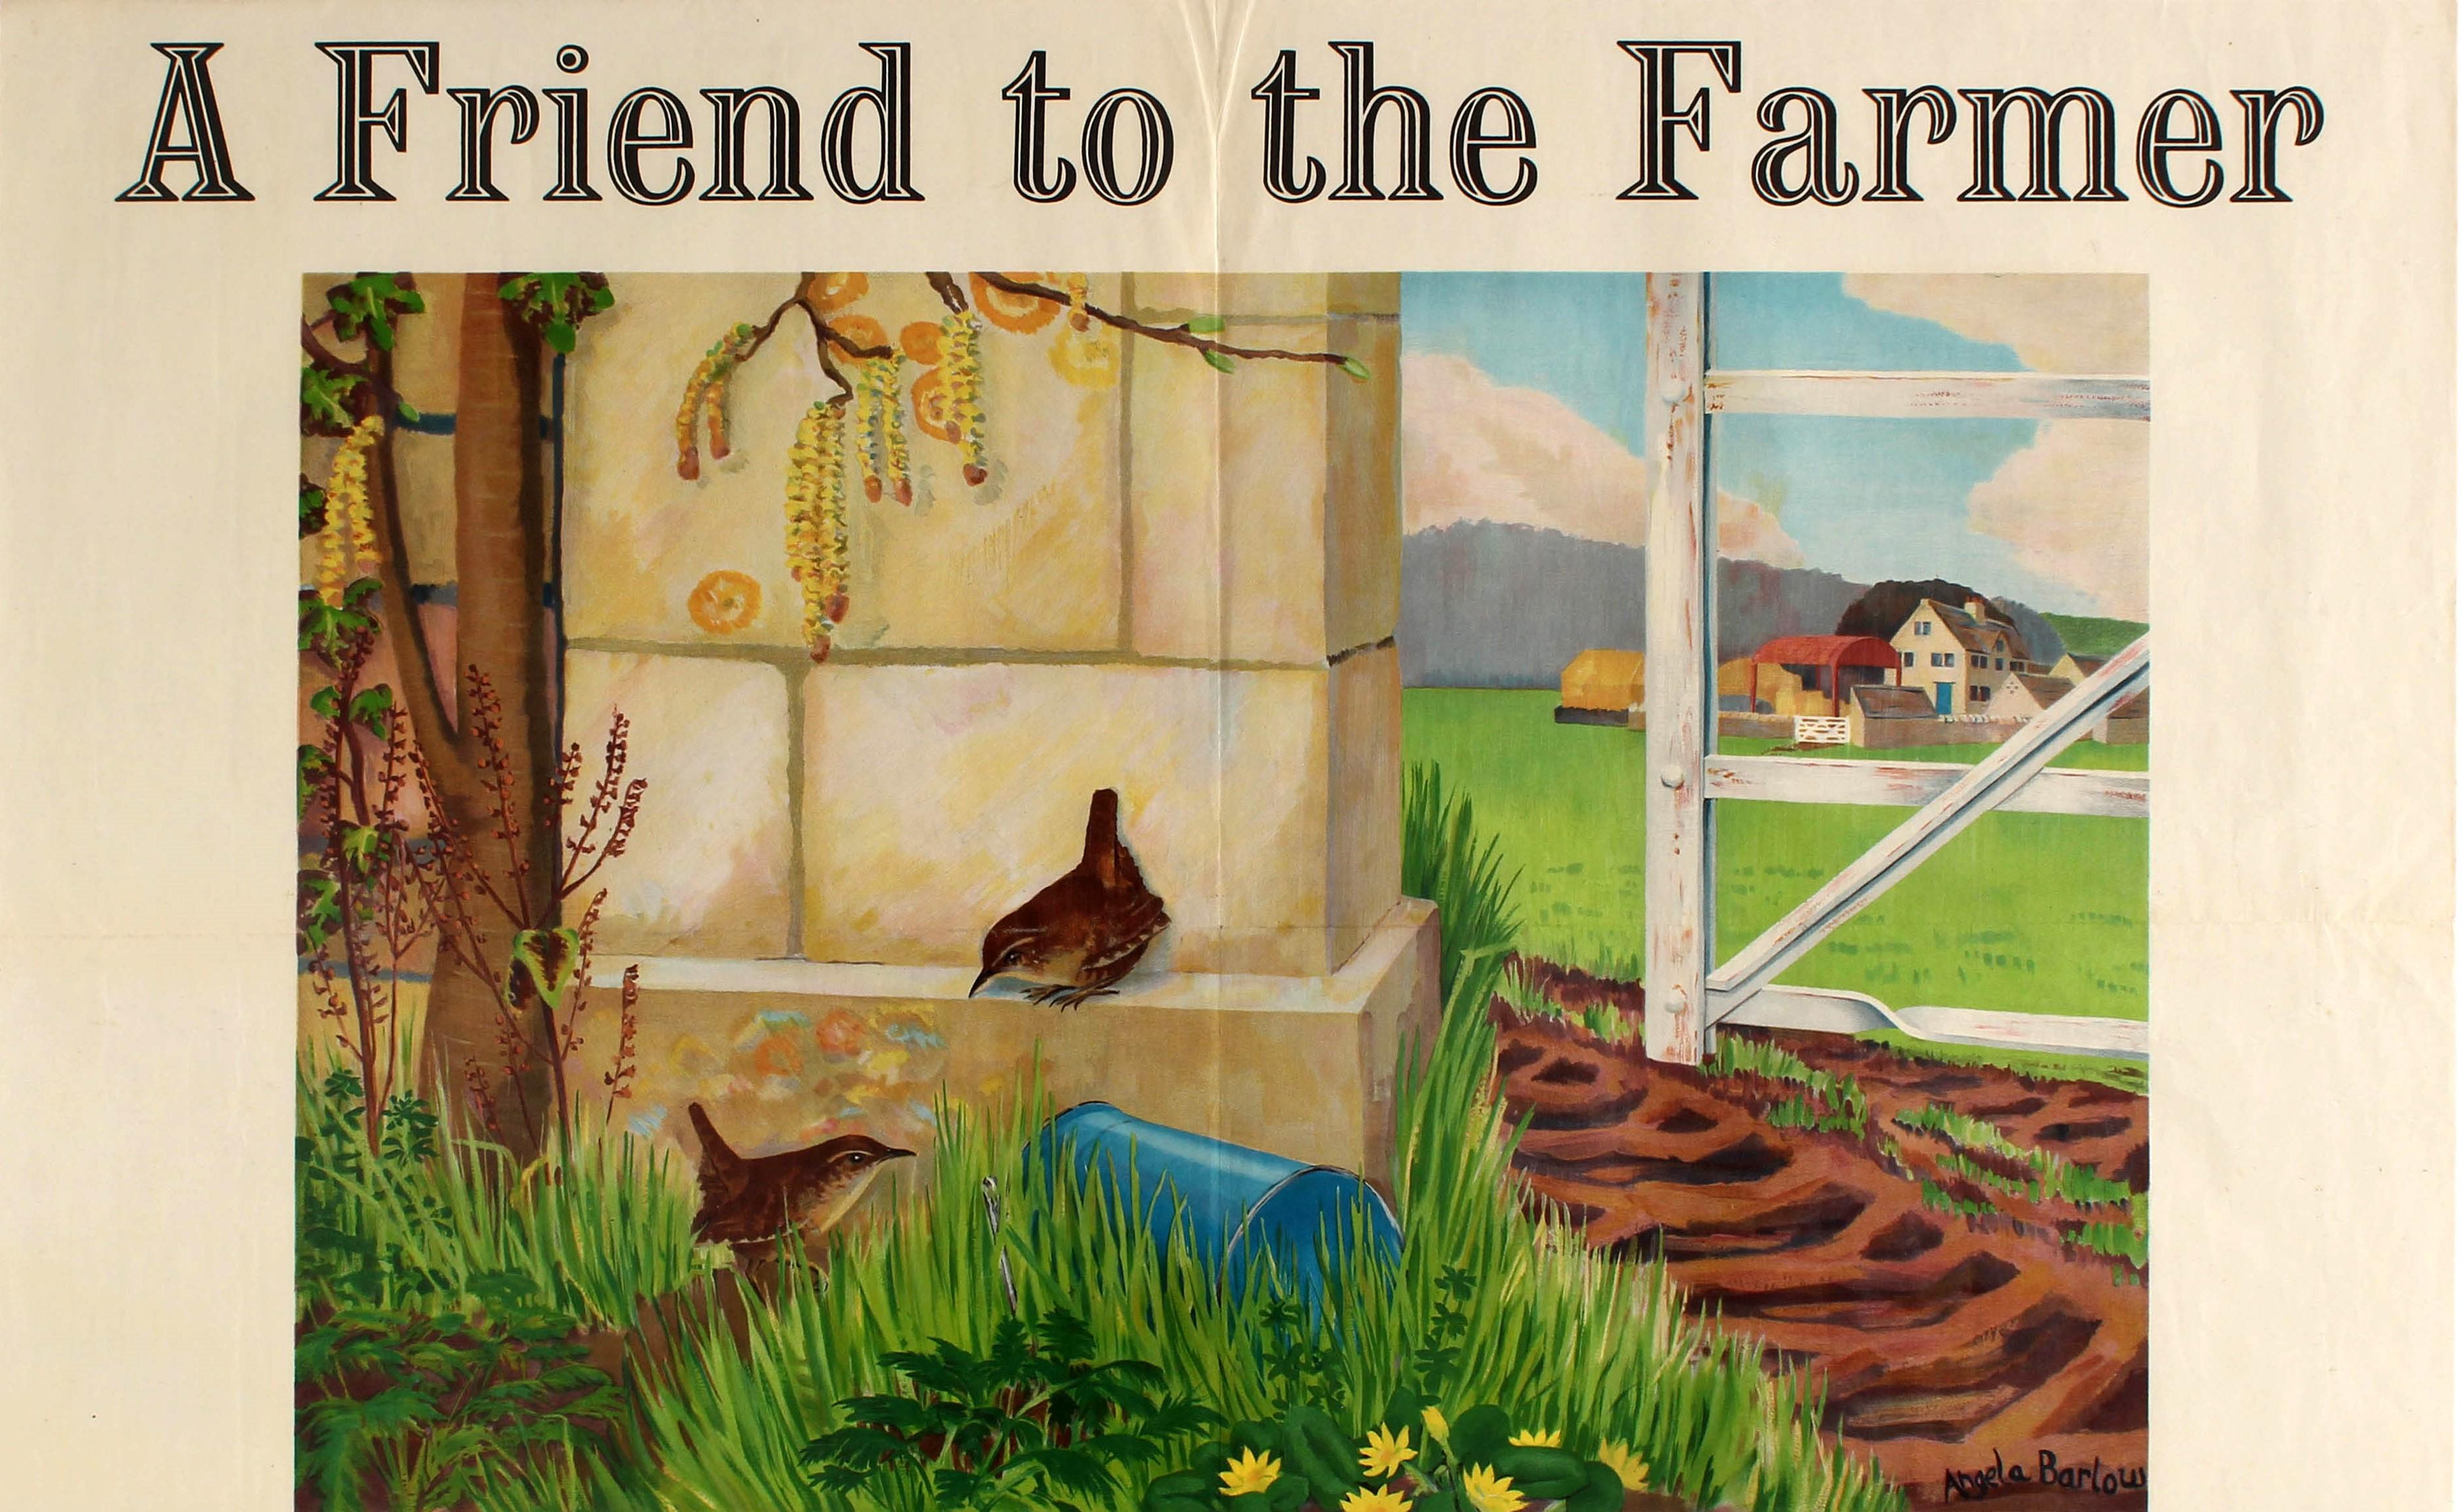 Original Vintage Poster A Friend To The Farmer Shell Tractor Oil Wrens Farm View - Print by Angela Barlow